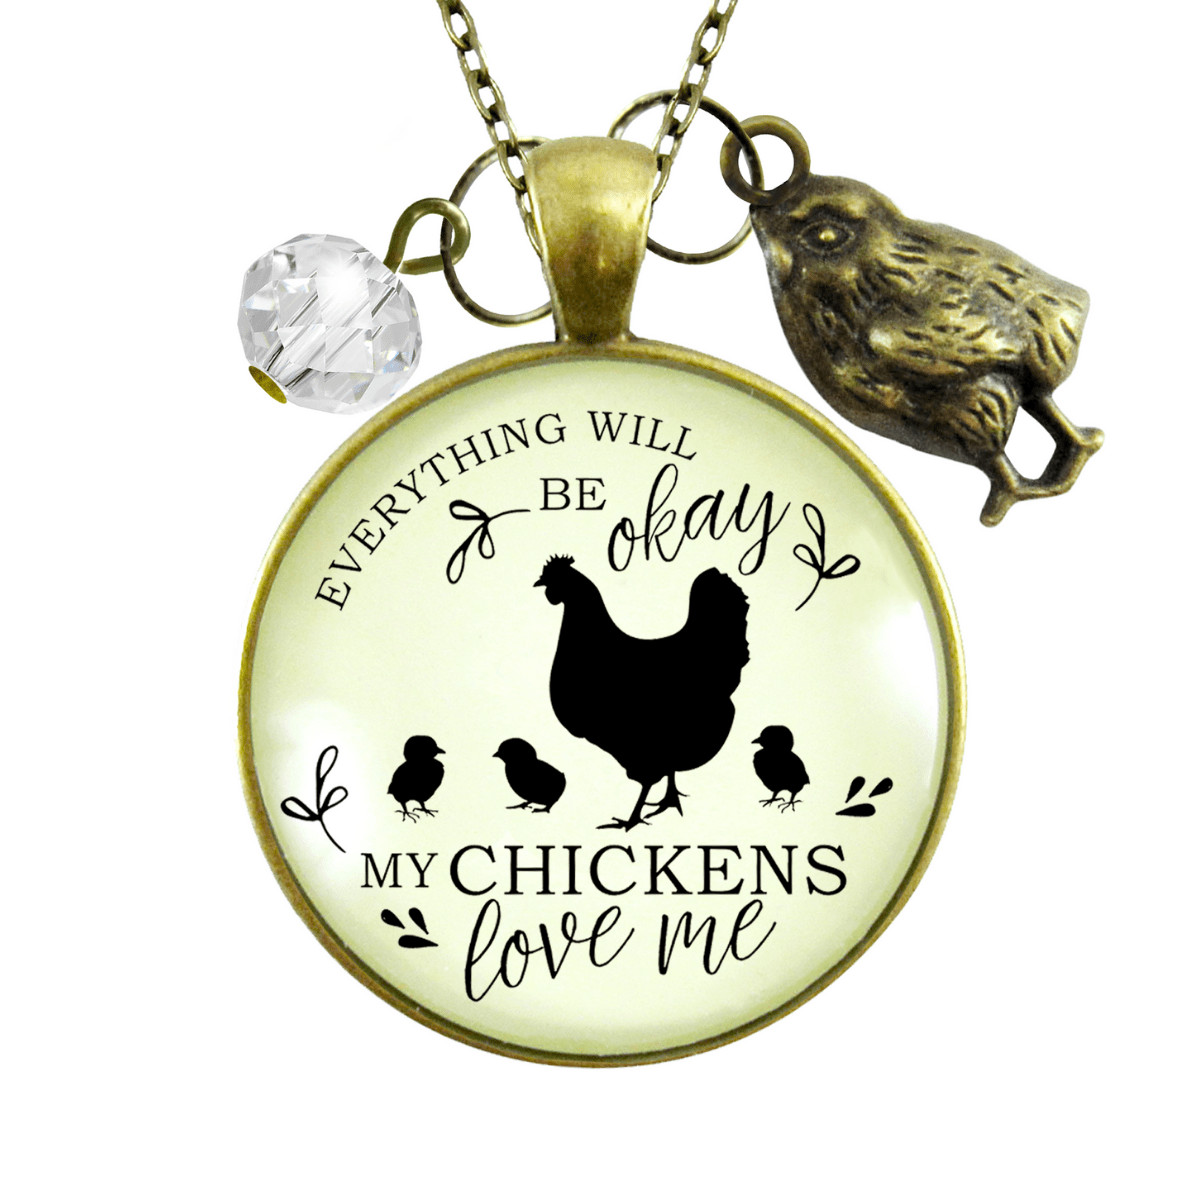 Gutsy Goodness Chicken Necklace All is Okay My Chickens Love Me Farm Inspired Jewelry - Gutsy Goodness;Chicken Necklace All Is Okay My Chickens Love Me Farm Inspired Jewelry - Gutsy Goodness Handmade Jewelry Gifts